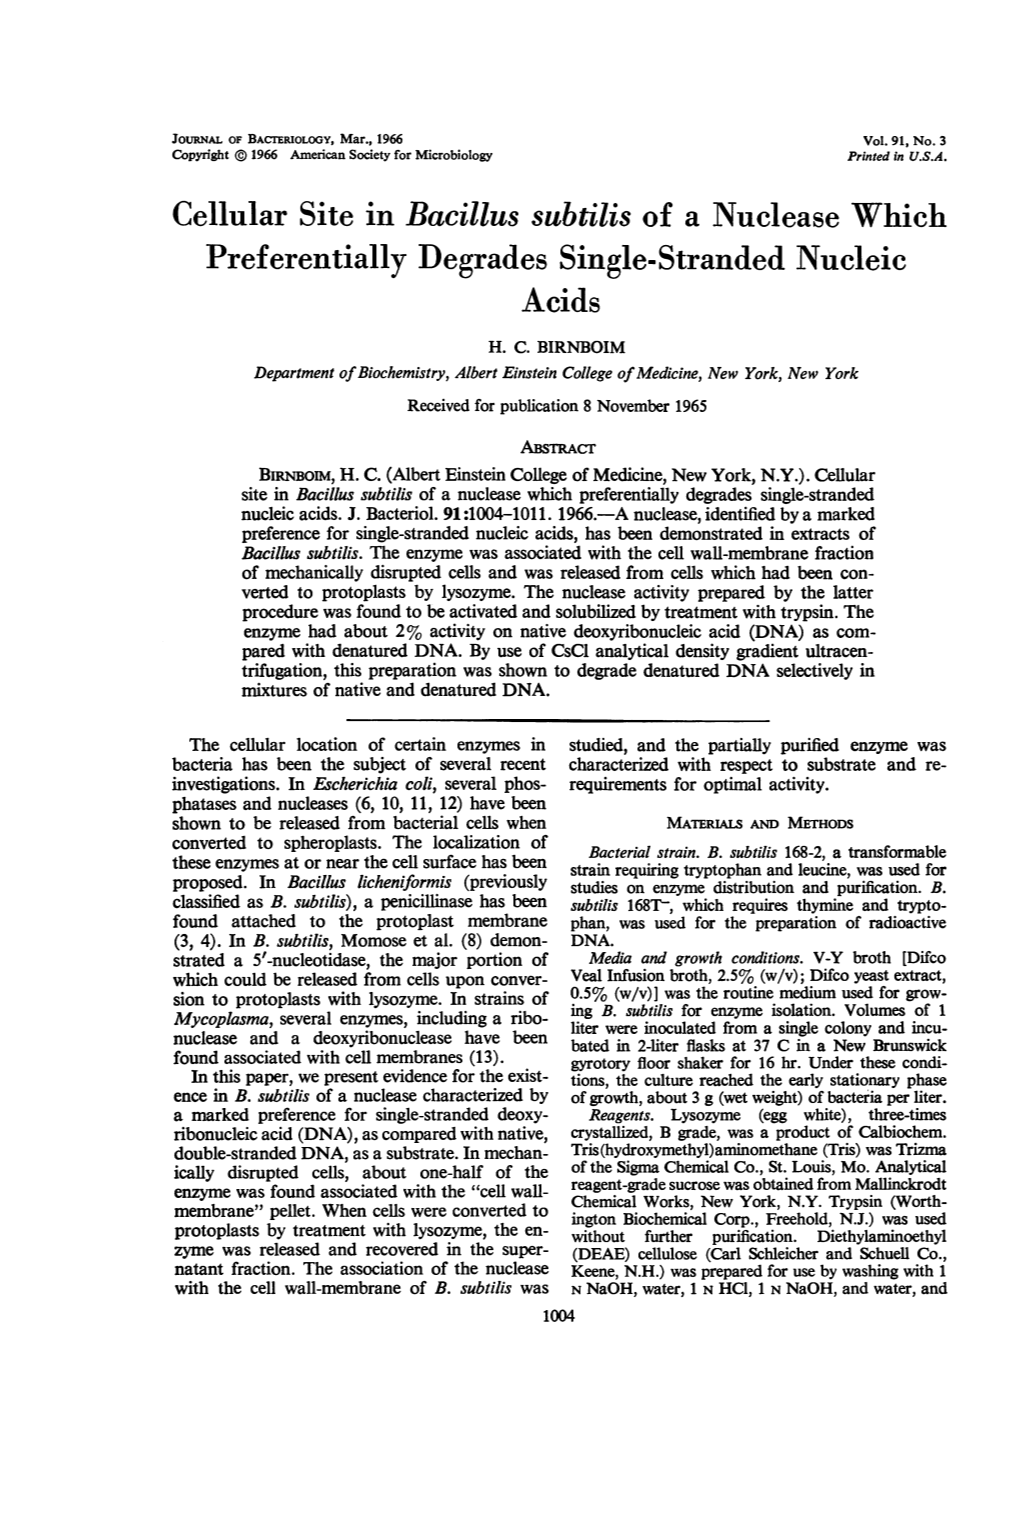 Cellular Site in Bacillus Subtilis of a Nuclease Which Preferentially Degrades Single-Stranded Nucleic Acids H